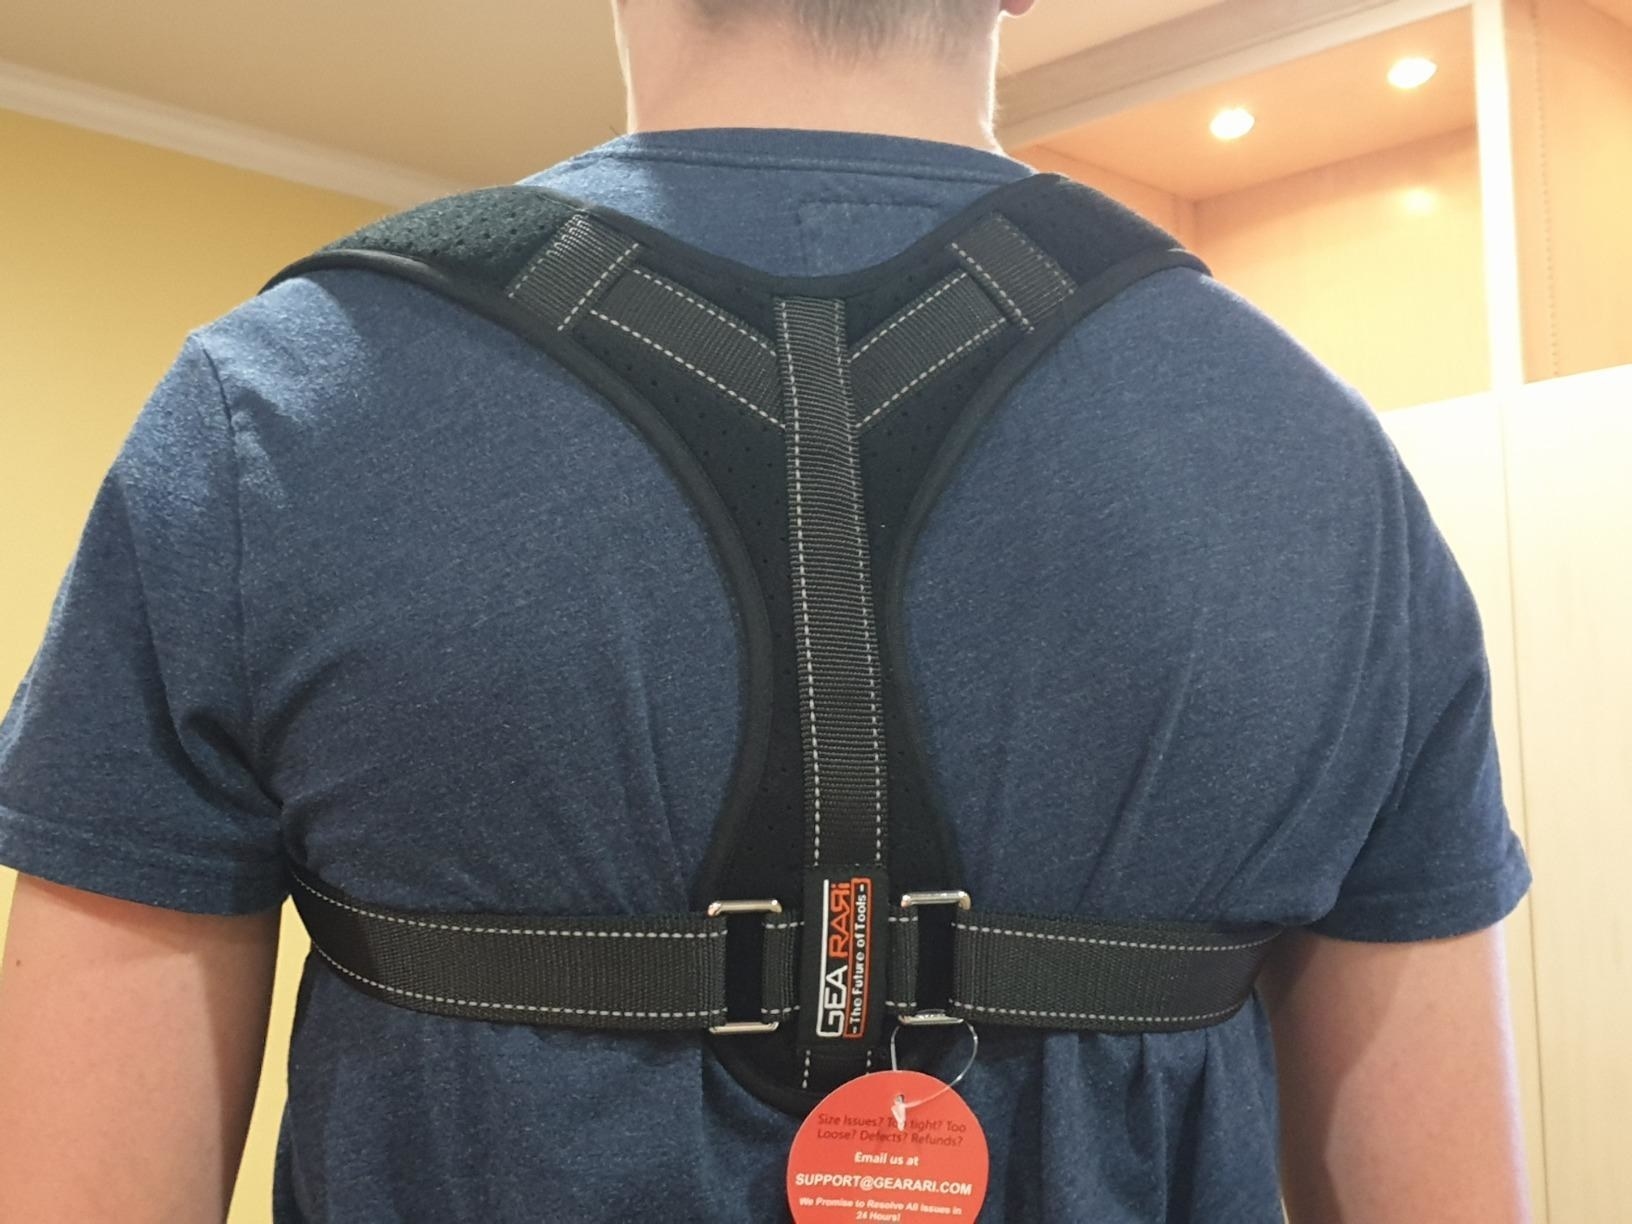 reviewer wearing the back brace 